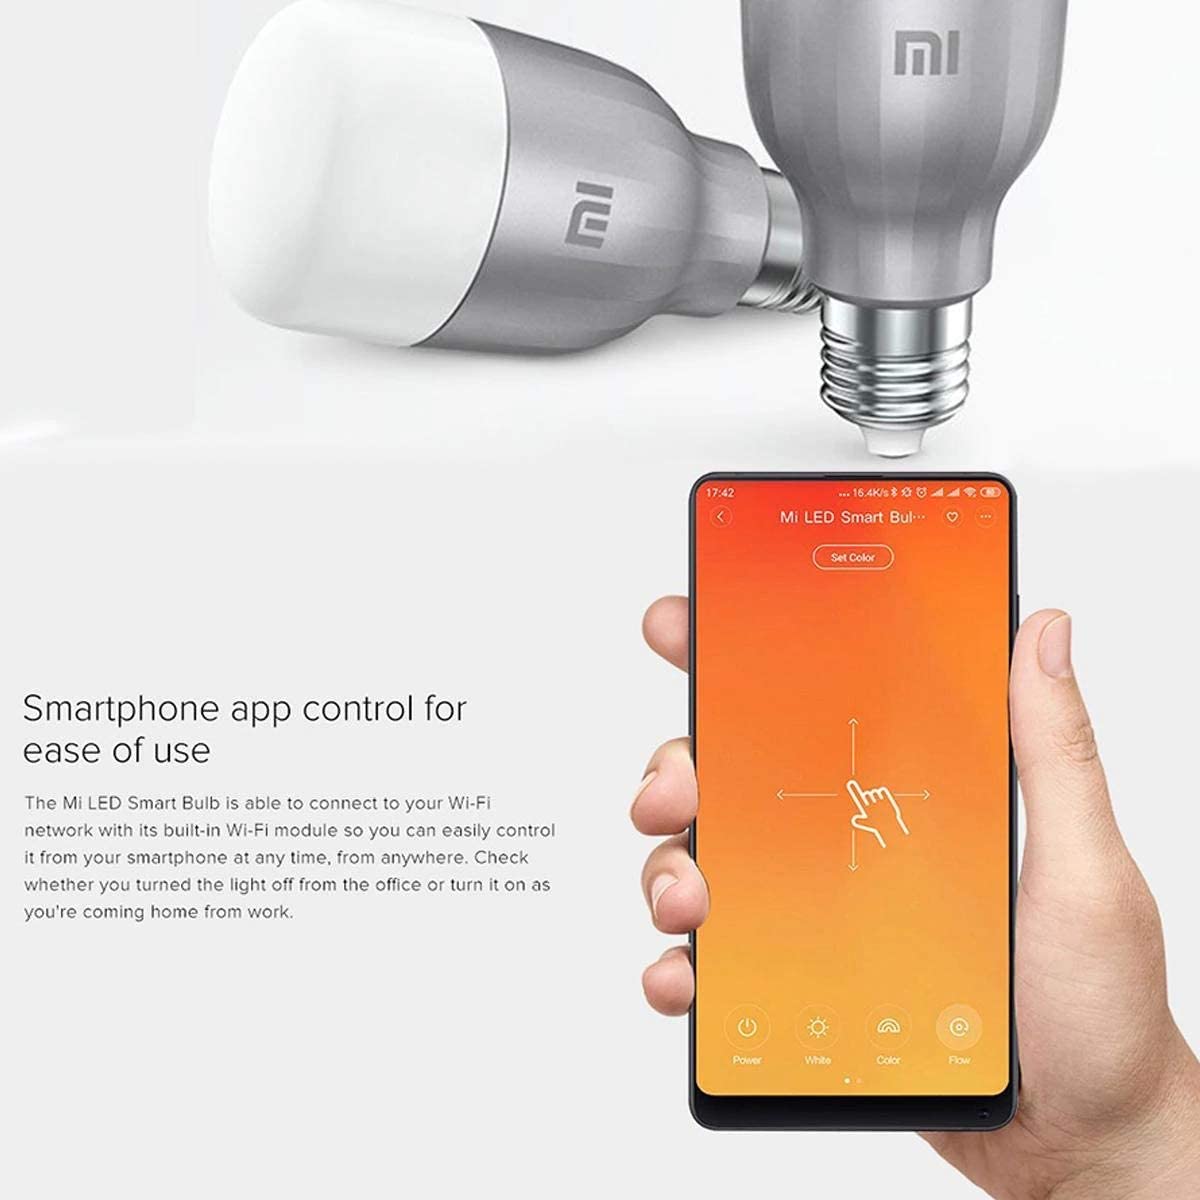 Xiaomi Xiaomi Mi Smart Led Bulb Essential(White And Color) Wifi Remote Control Smart Light Work With Alexa And Google Assistant, Voice Control, Wifi Connection, Adjustable Color Temperature, Scheduled On/Off, Smart App Control Xiaomi Mi Led Smart Bulb Essential Bulb (White And Color)(9W)